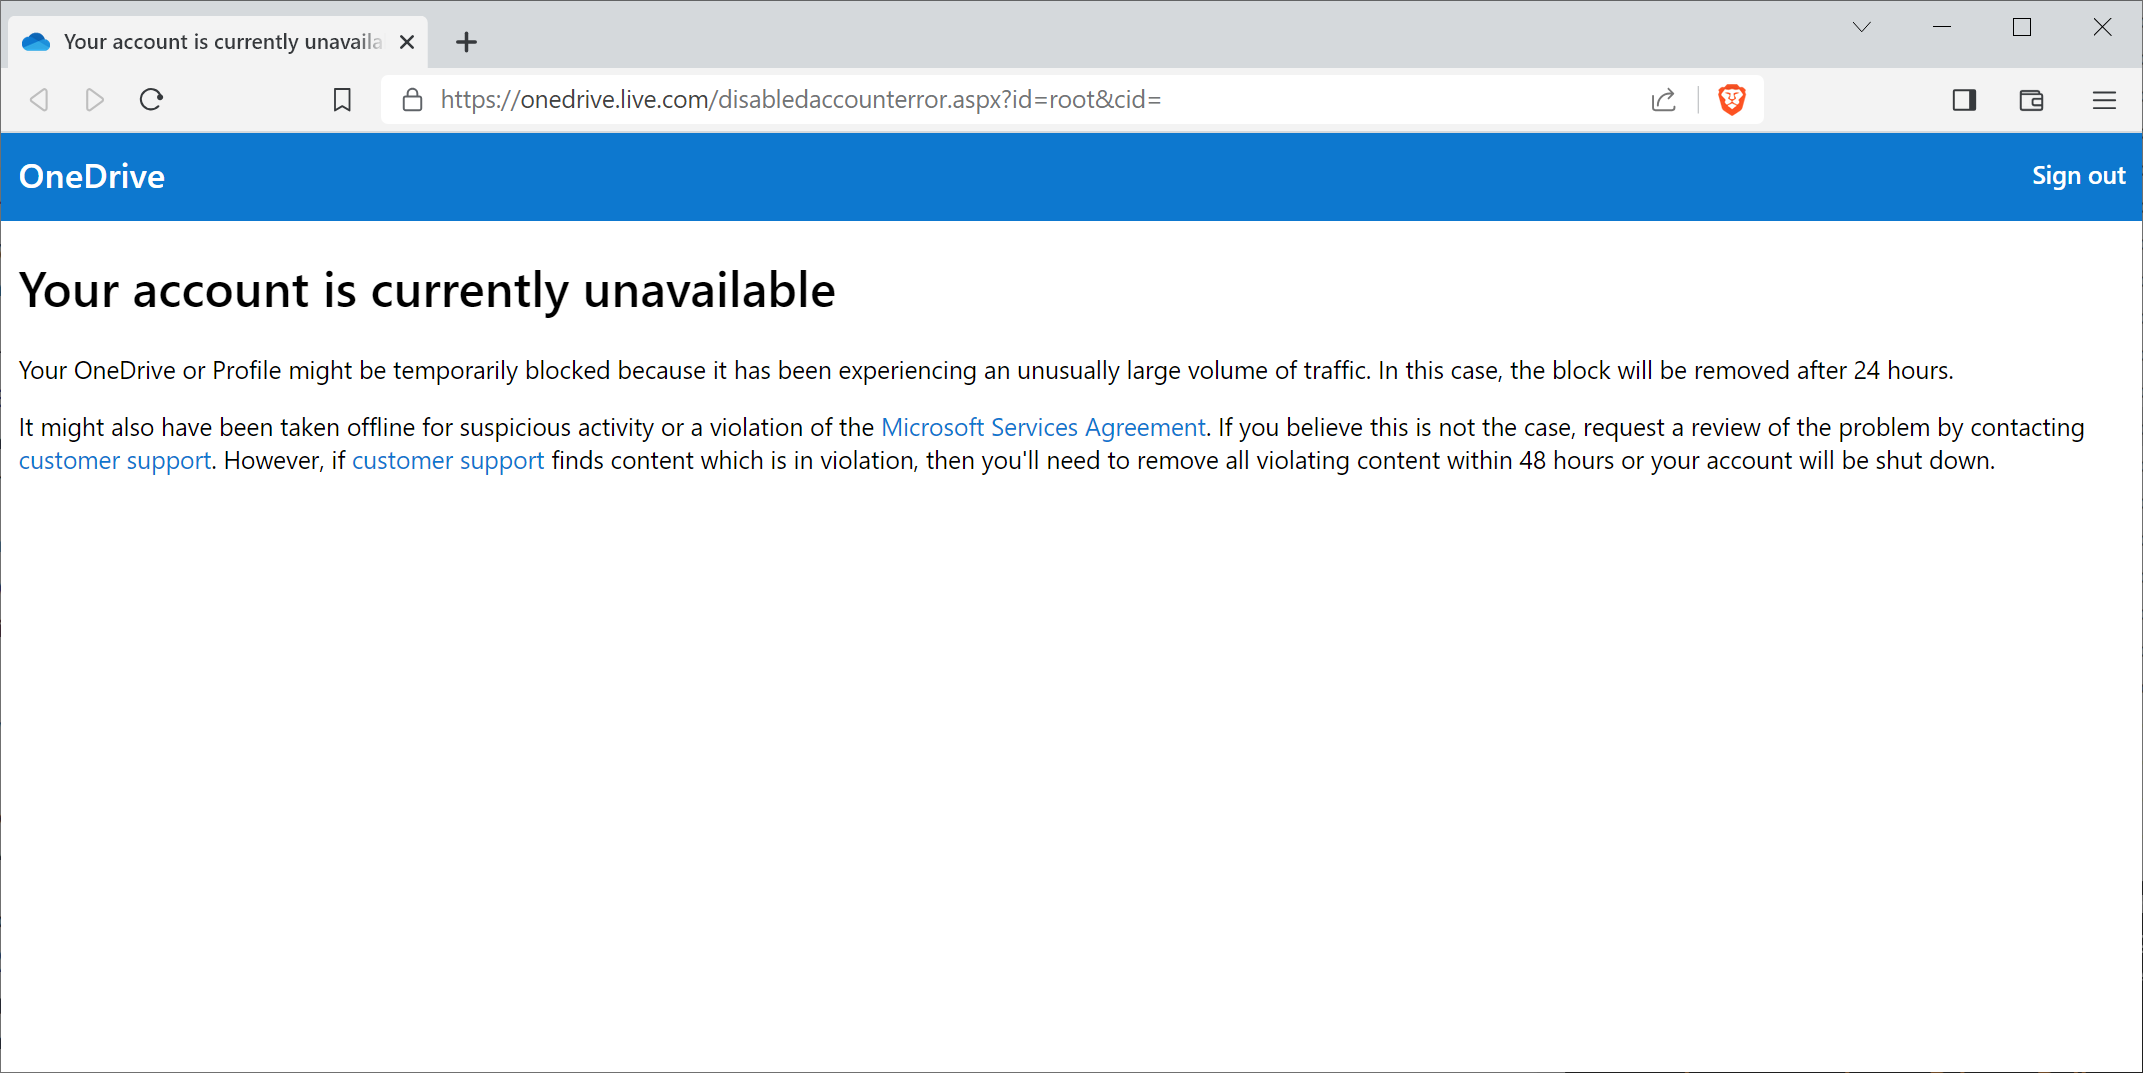 onedrive-your-account-is-currently-unavailable